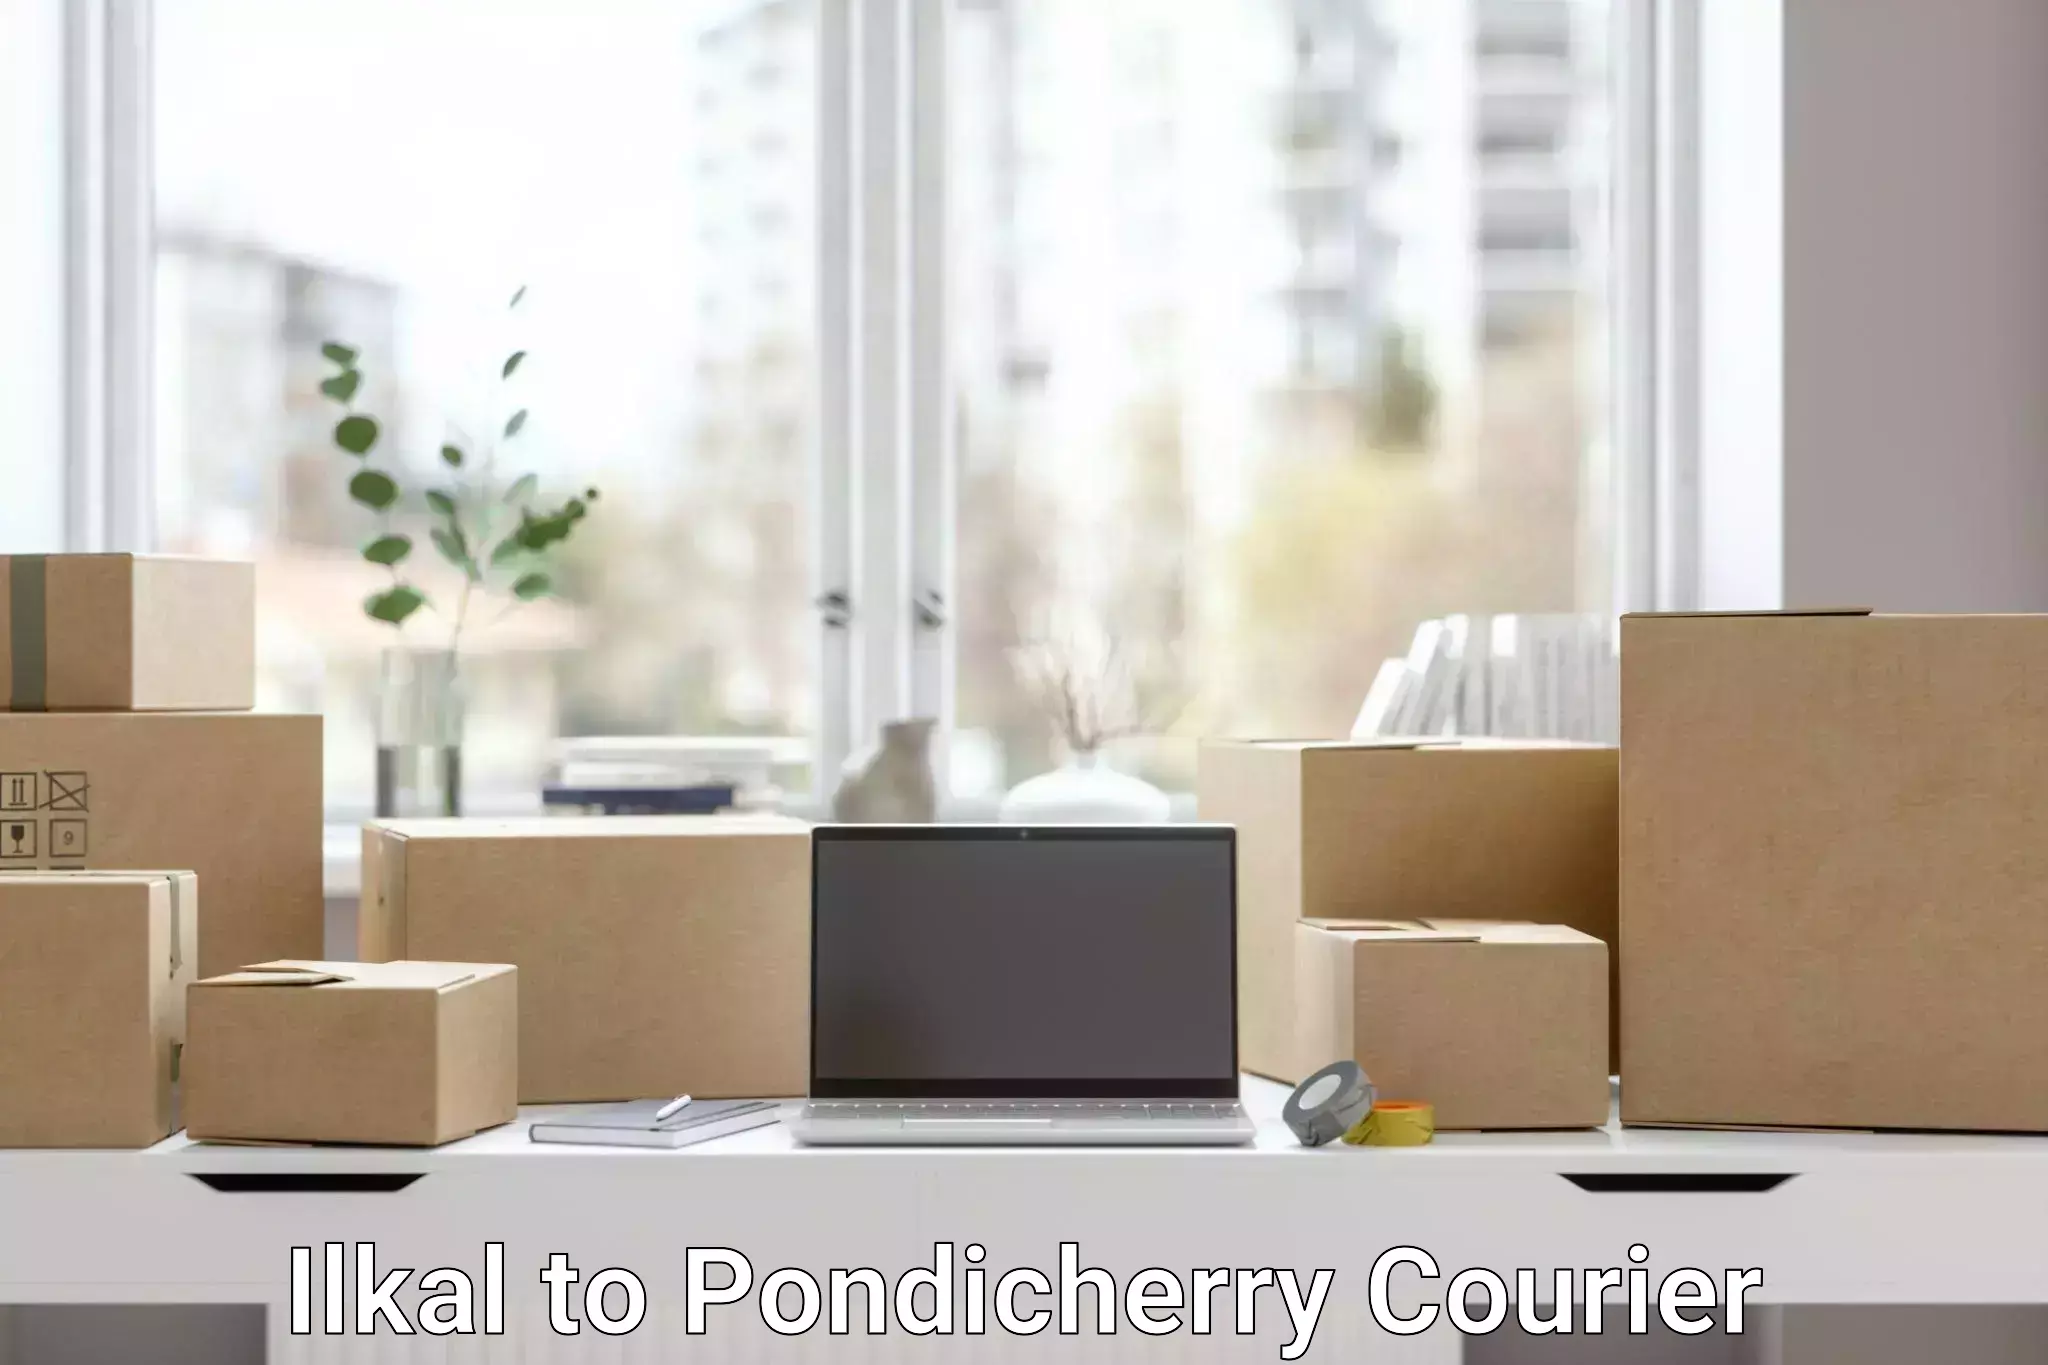 State-of-the-art courier technology Ilkal to Pondicherry